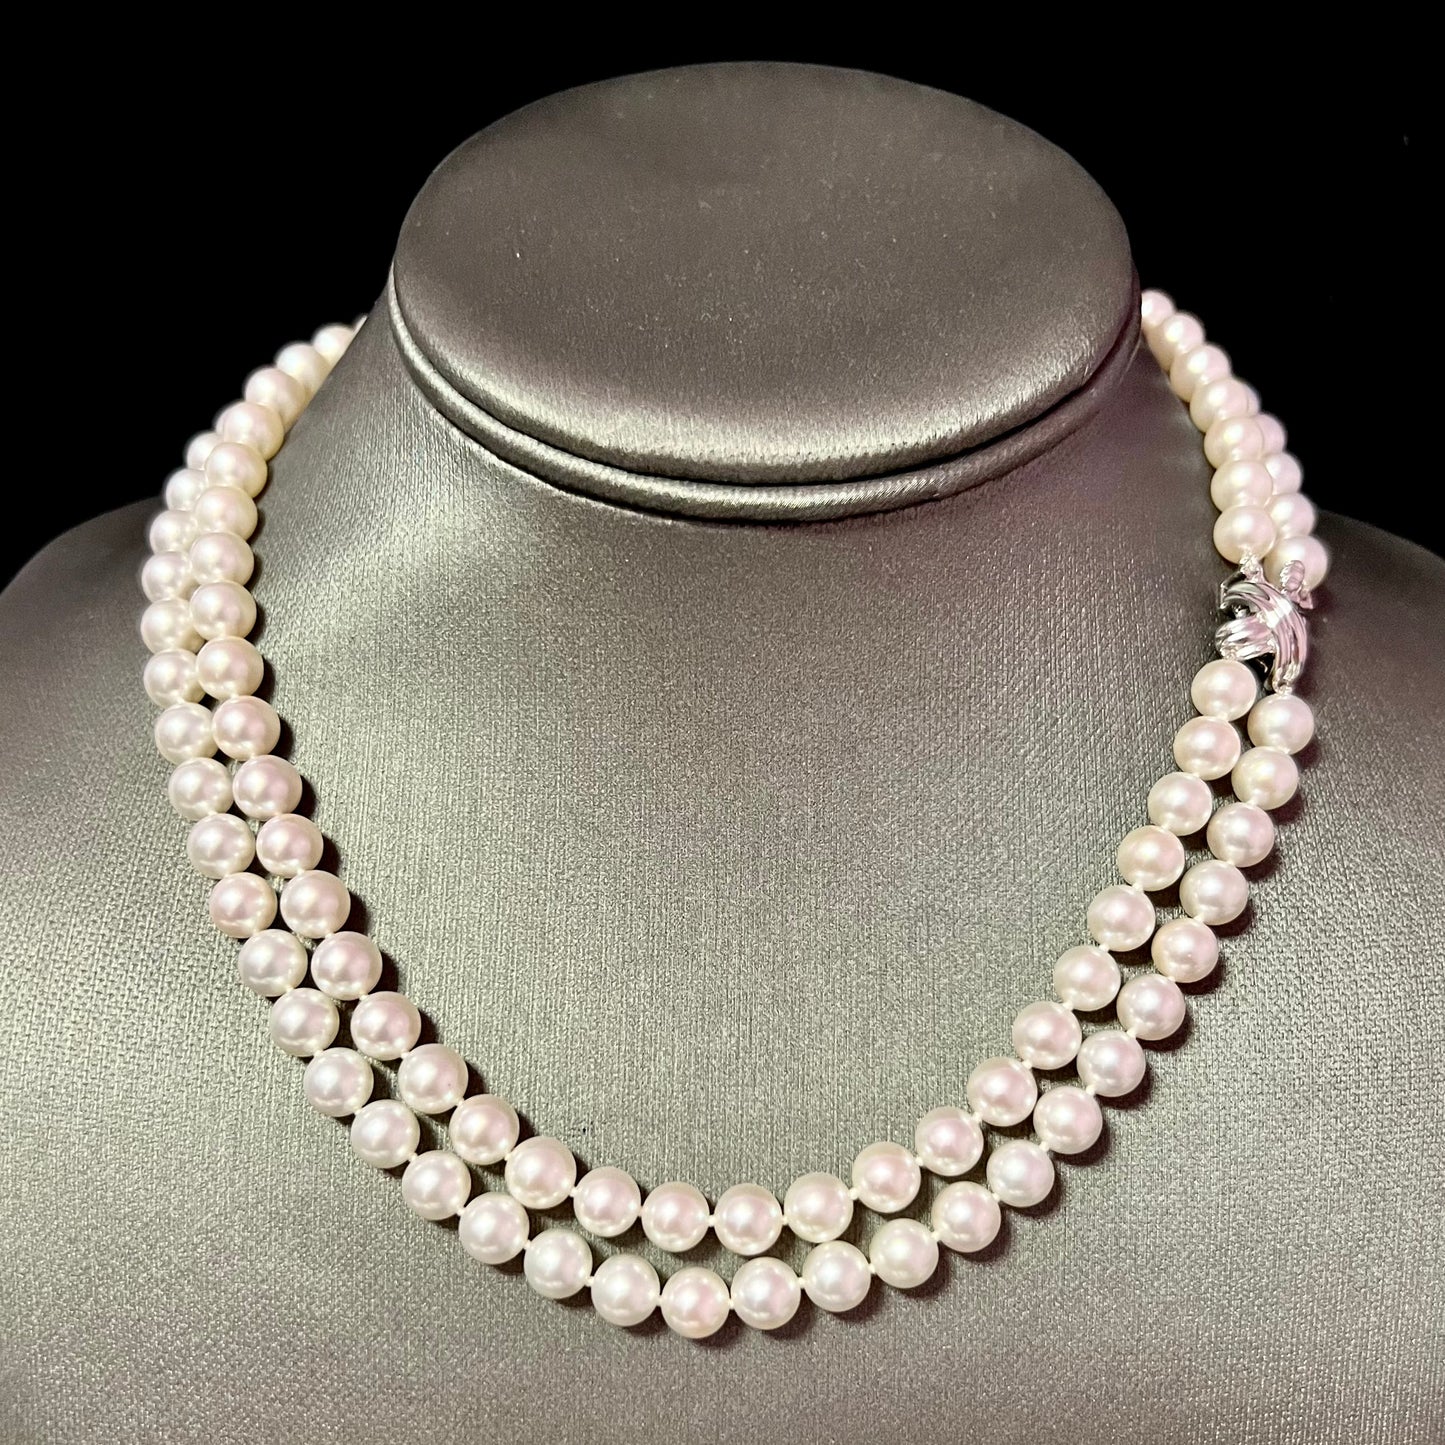 Tiffany & Co Estate Akoya Pearl Necklace 16-17" 18k Gold 7 mm Certified $12,950 401395